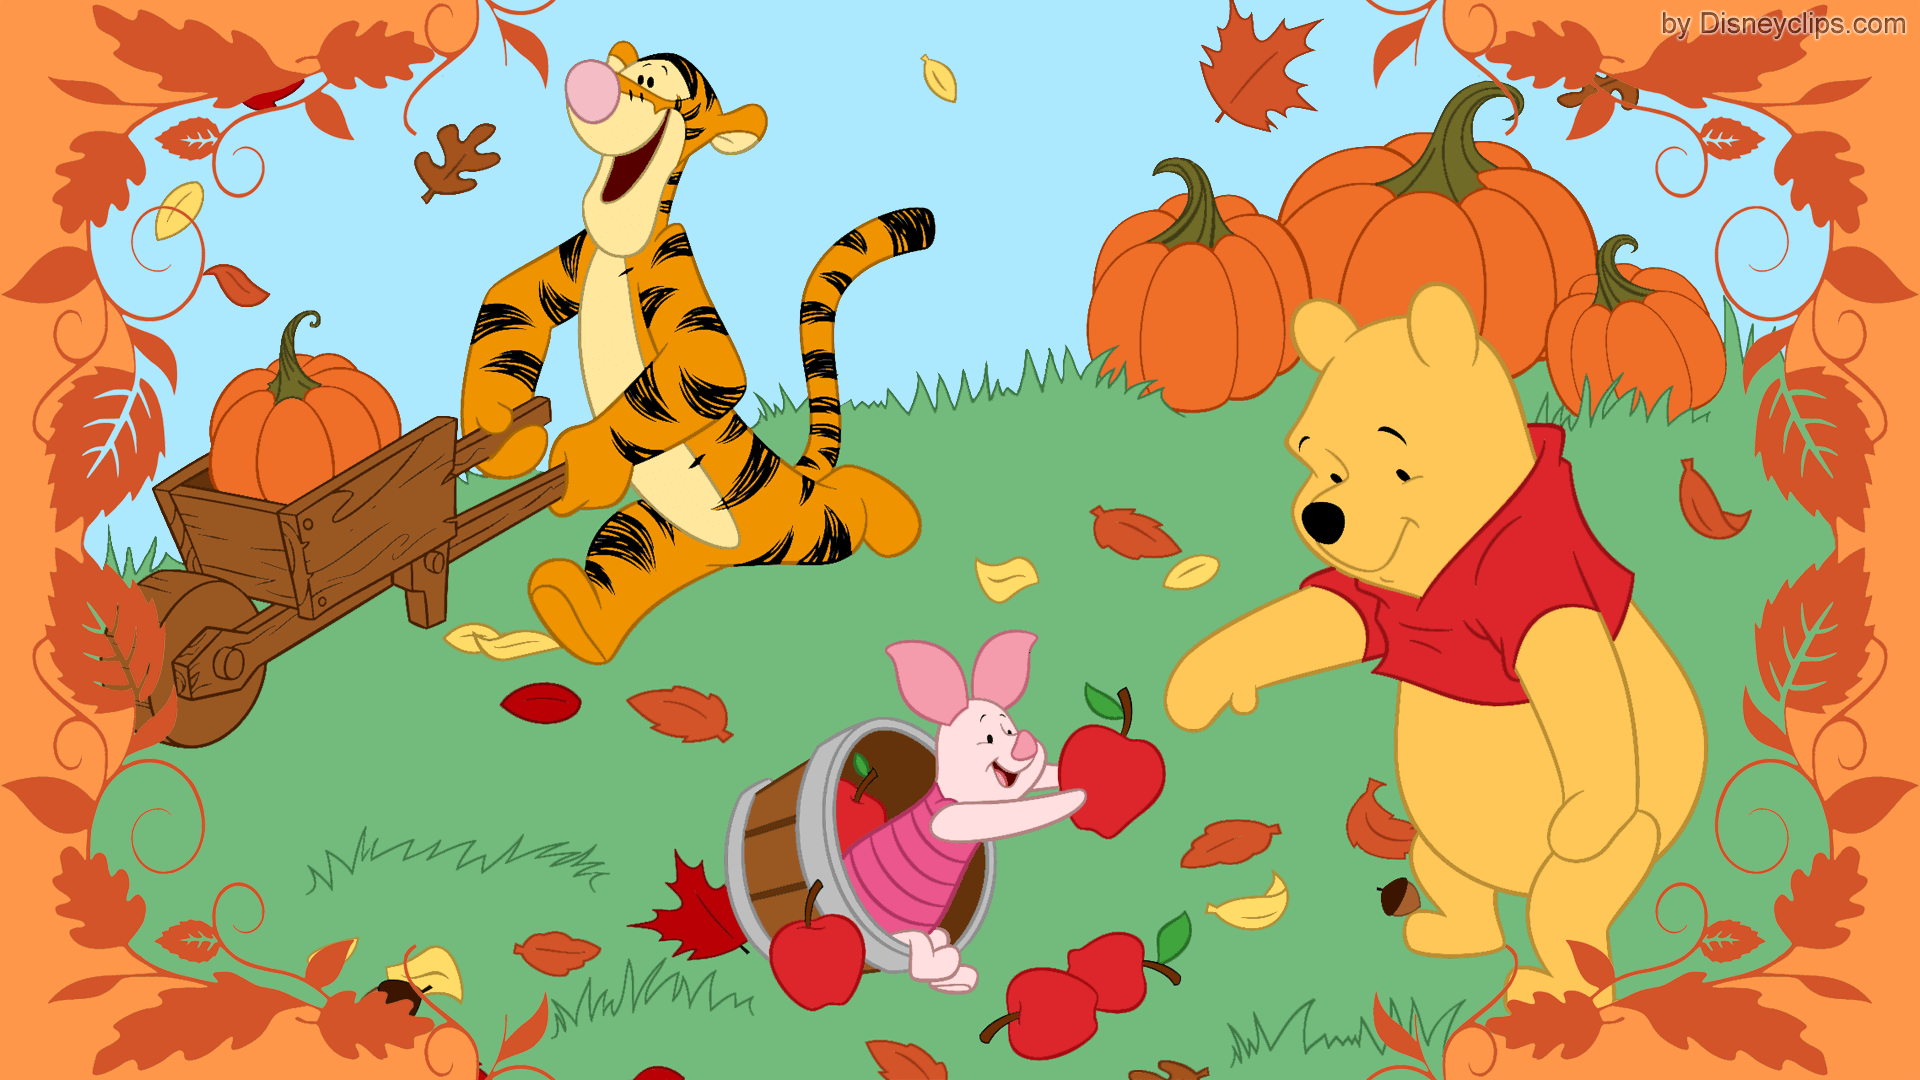 Winnie the Pooh and Friends Wallpaper | Disneyclips.com